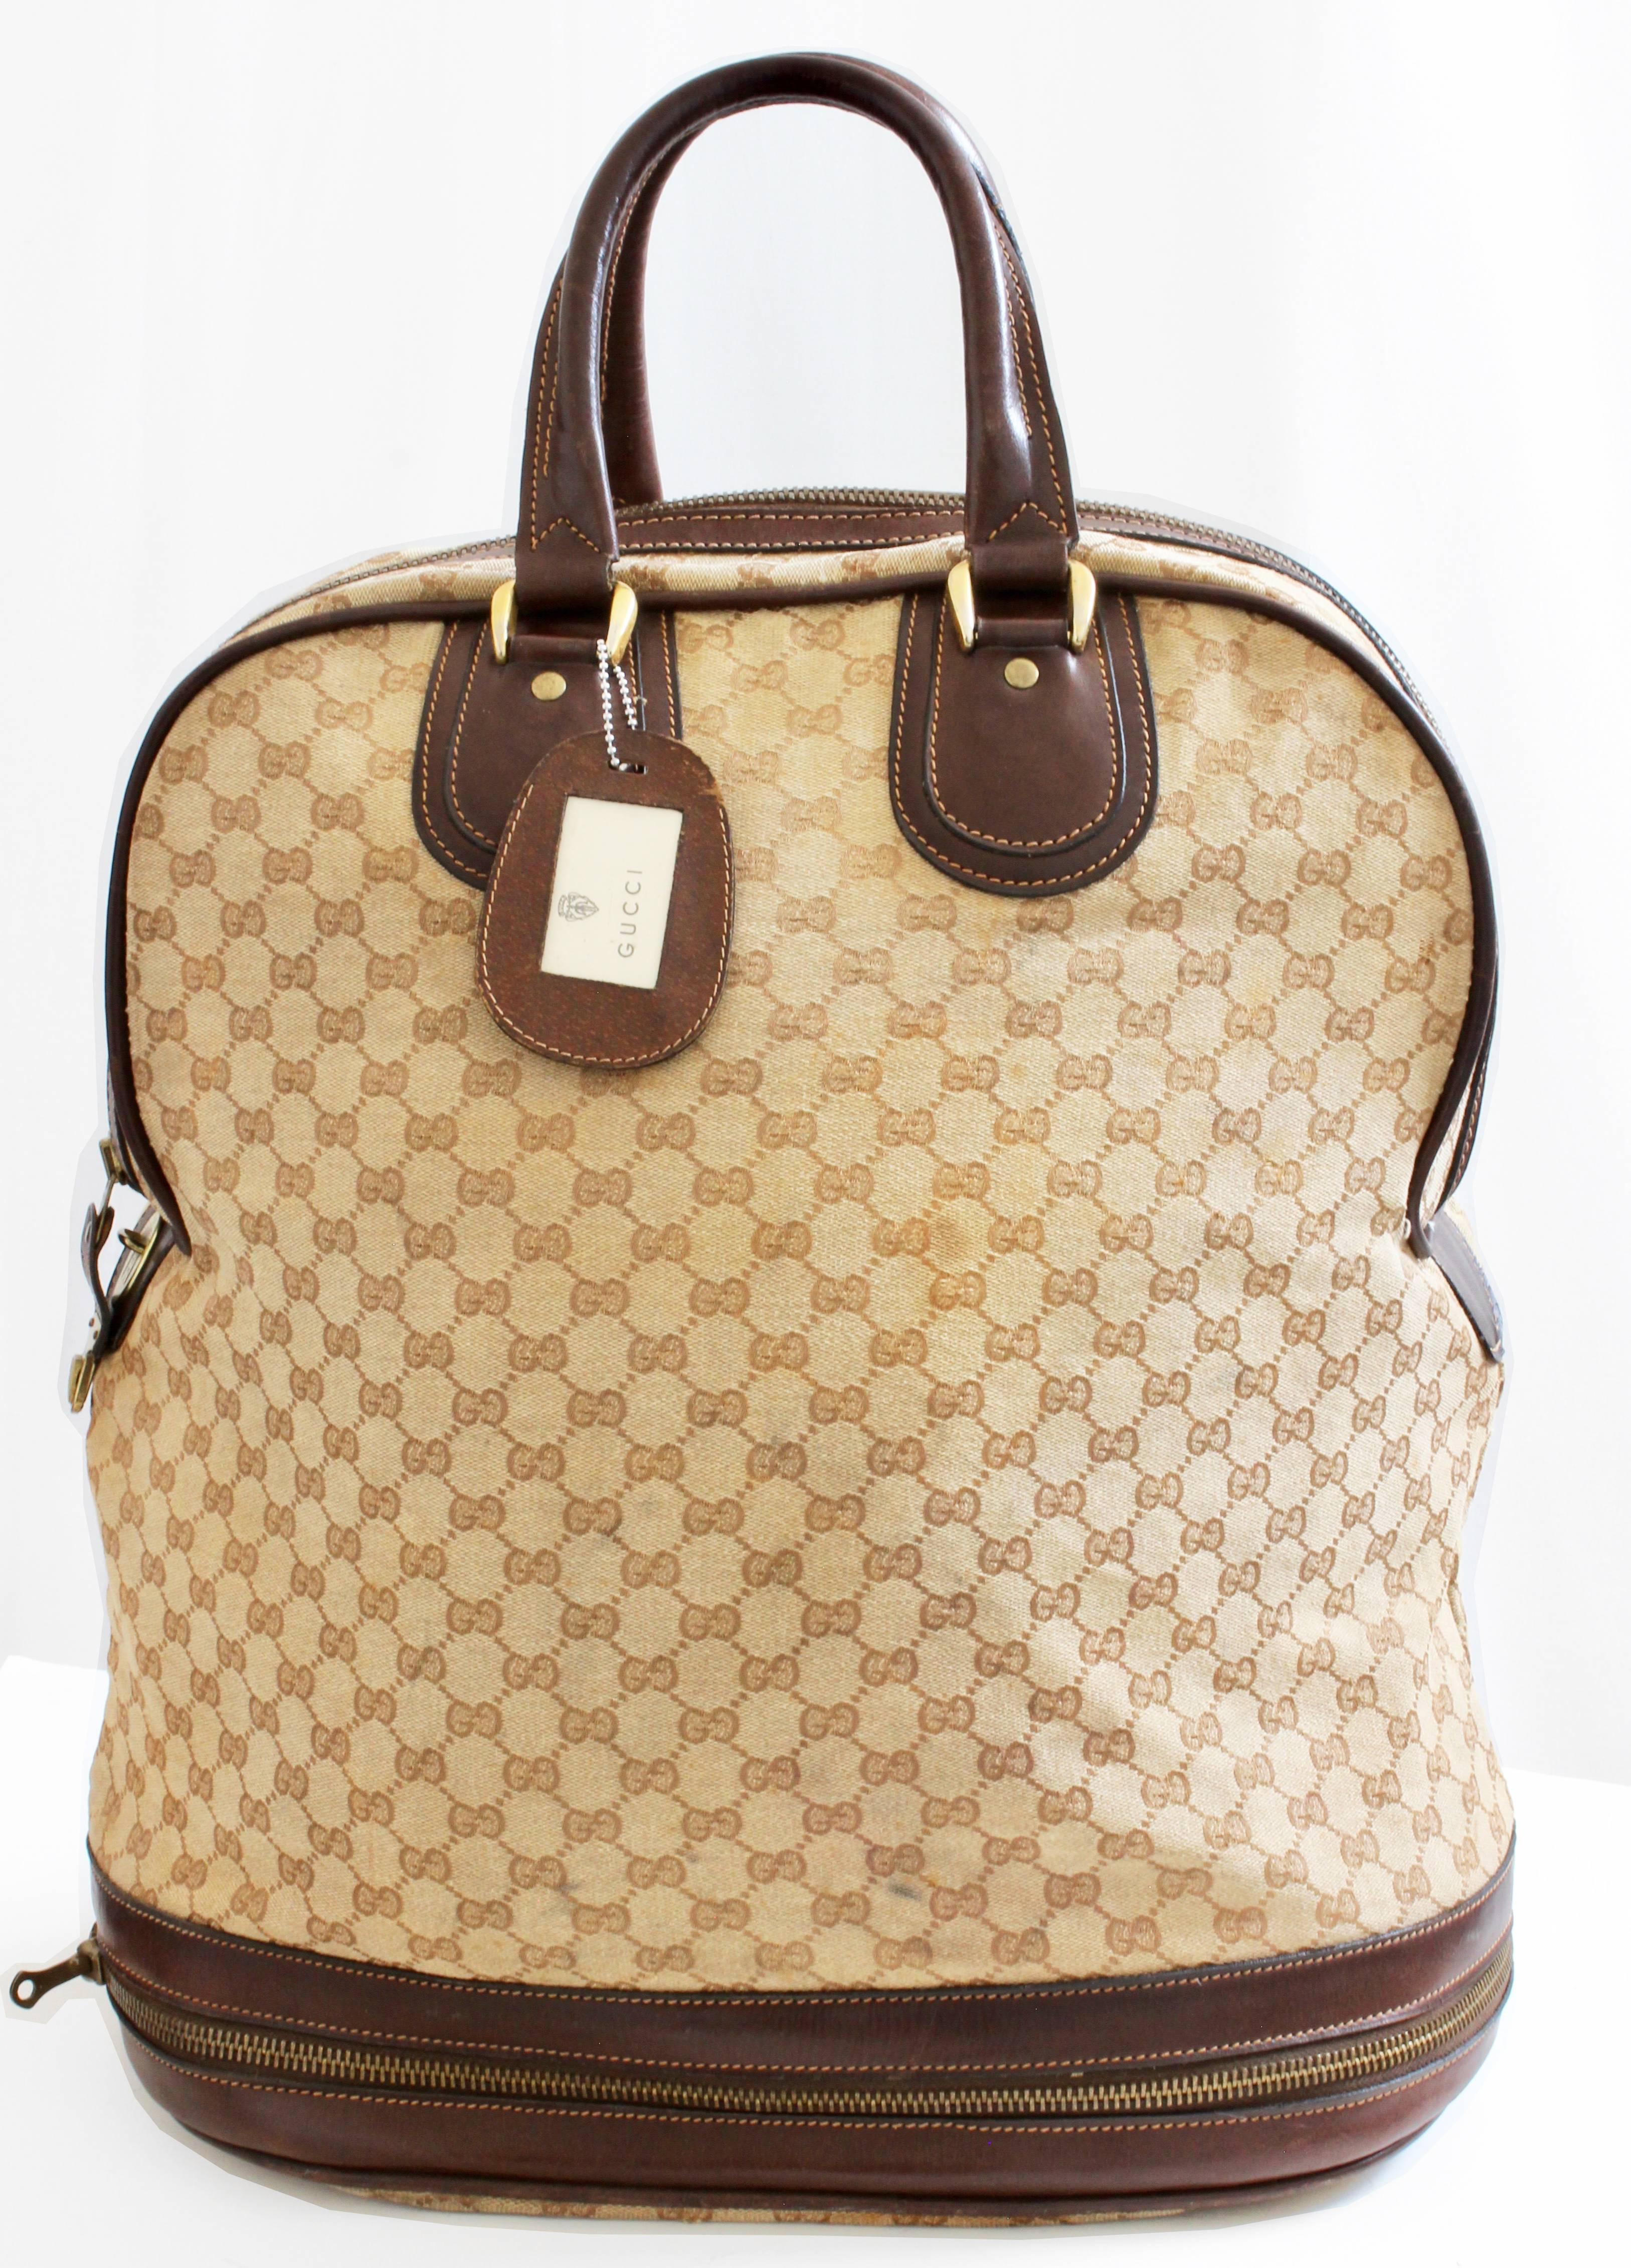 Travel in style with this unique keepall or steamer bag from Gucci, likely made in the 1970s.  It features Gucci's signature Supreme canvas with leather trim and a zippered expandable section at the bottom, which provides an additional 9 inches of